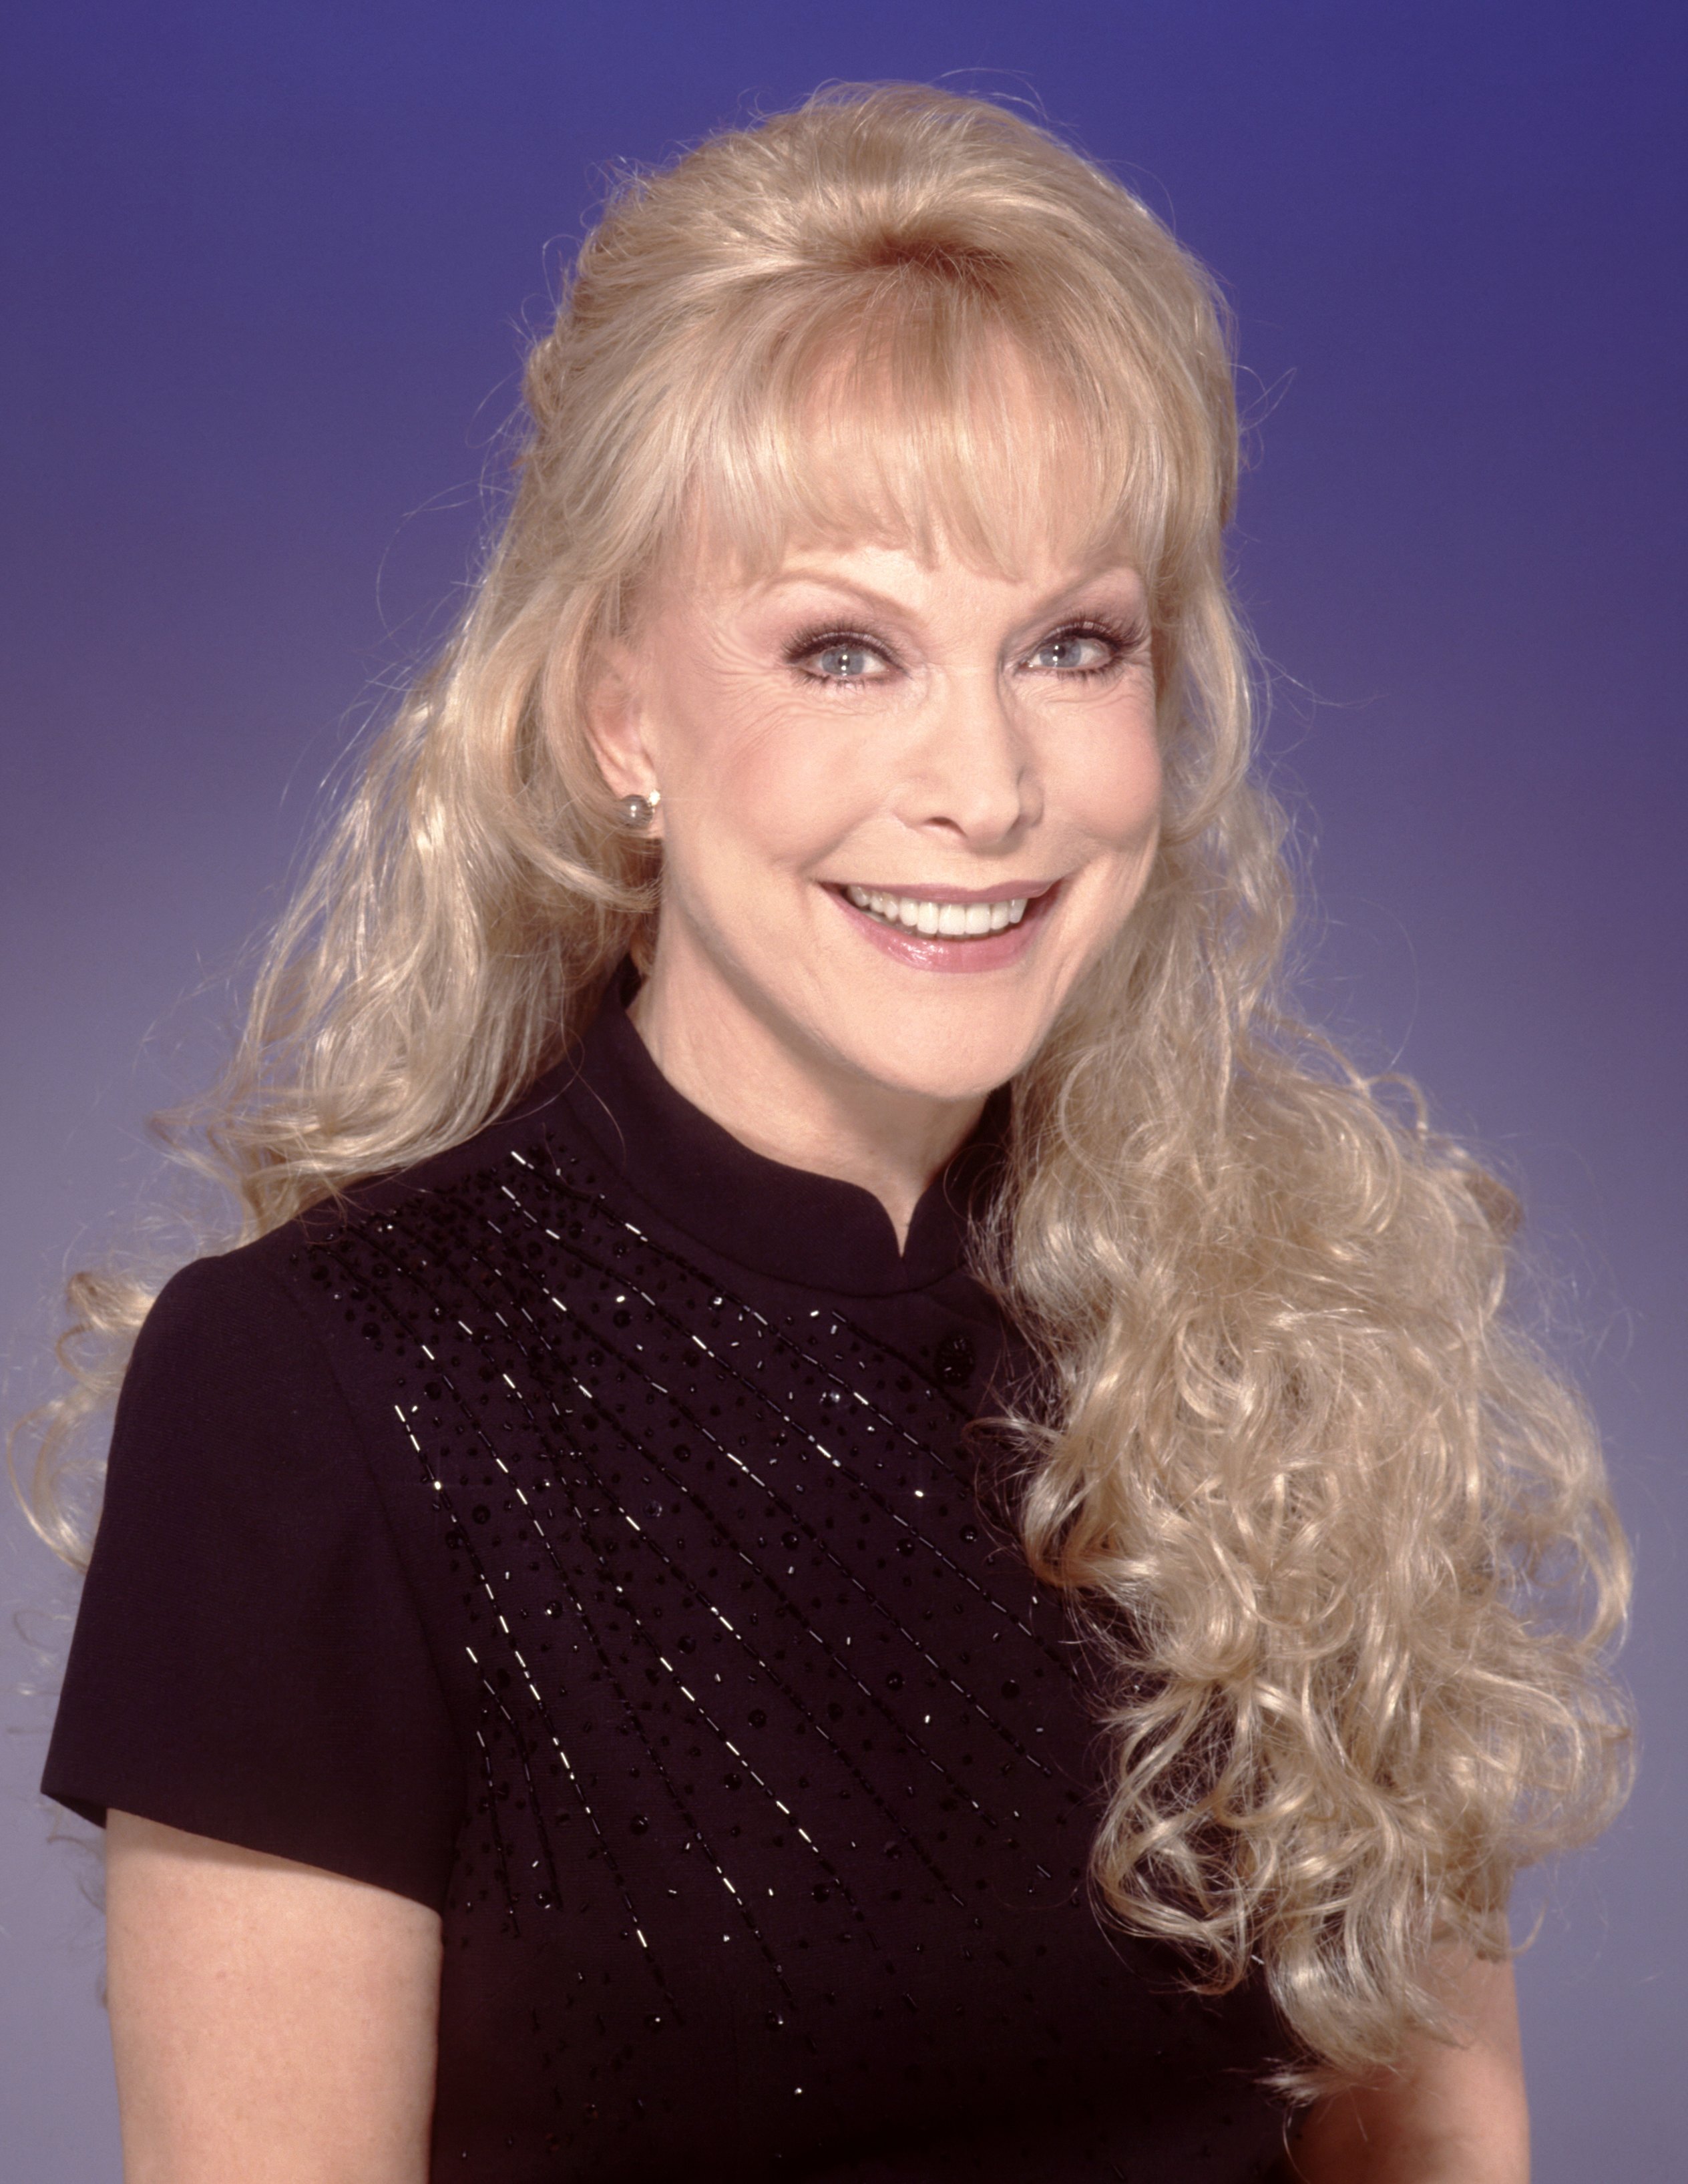 Barbara Eden's portrait features her with long hair in 2000 in Los Angeles, California. | Source: Getty Images